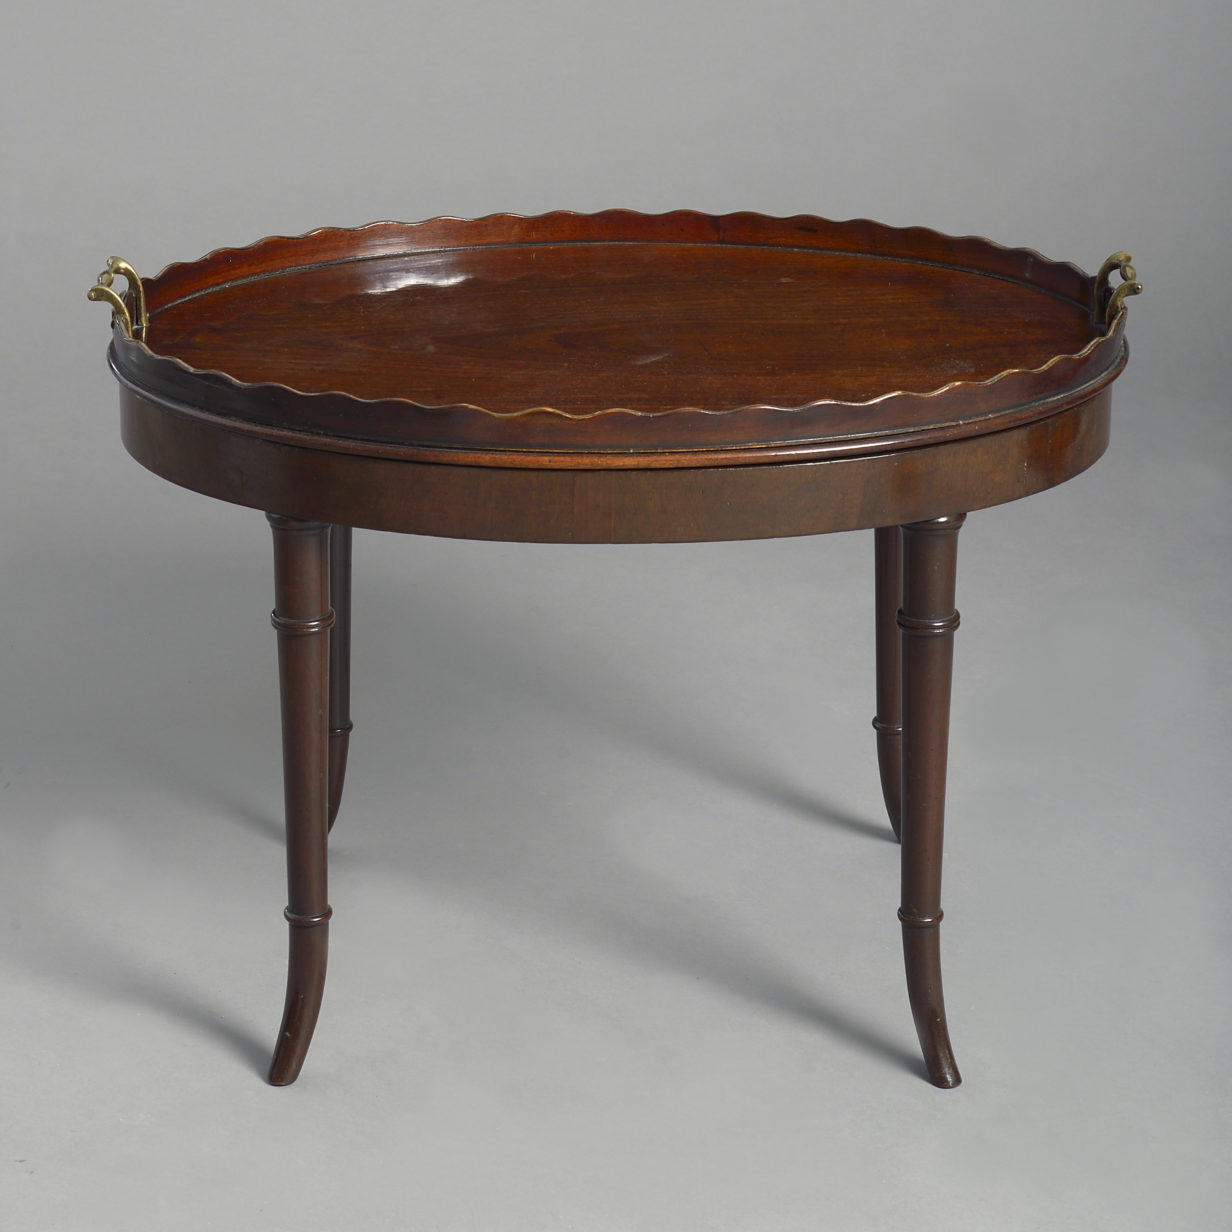 An early 19th century george iii period mahogany tray as a low table